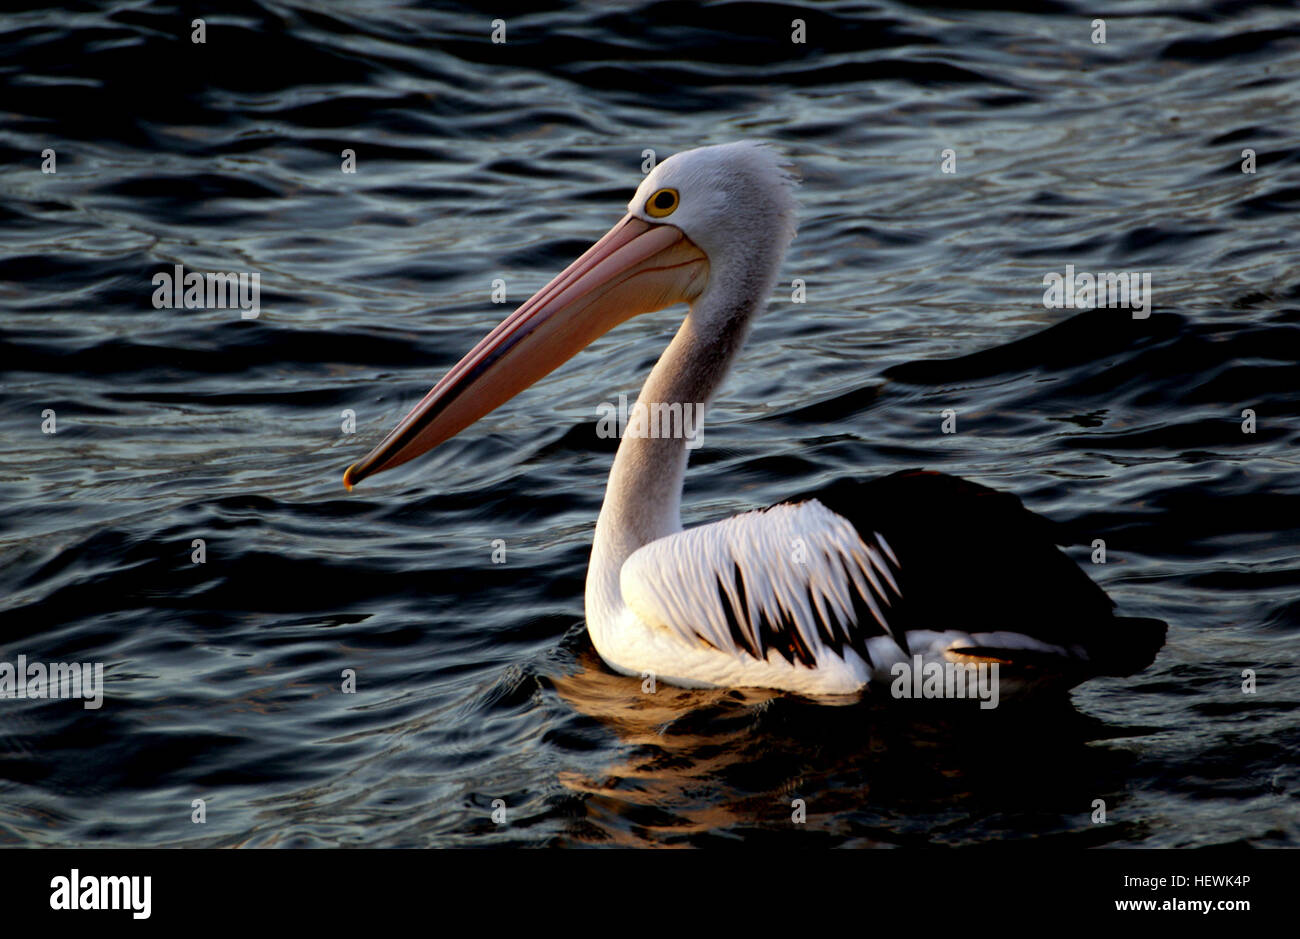 Pelicans frequent inland and coastal waters where they feed principally on fish, catching them at or near the water surface. Gregarious birds, they often hunt cooperatively and breed colonially. Stock Photo